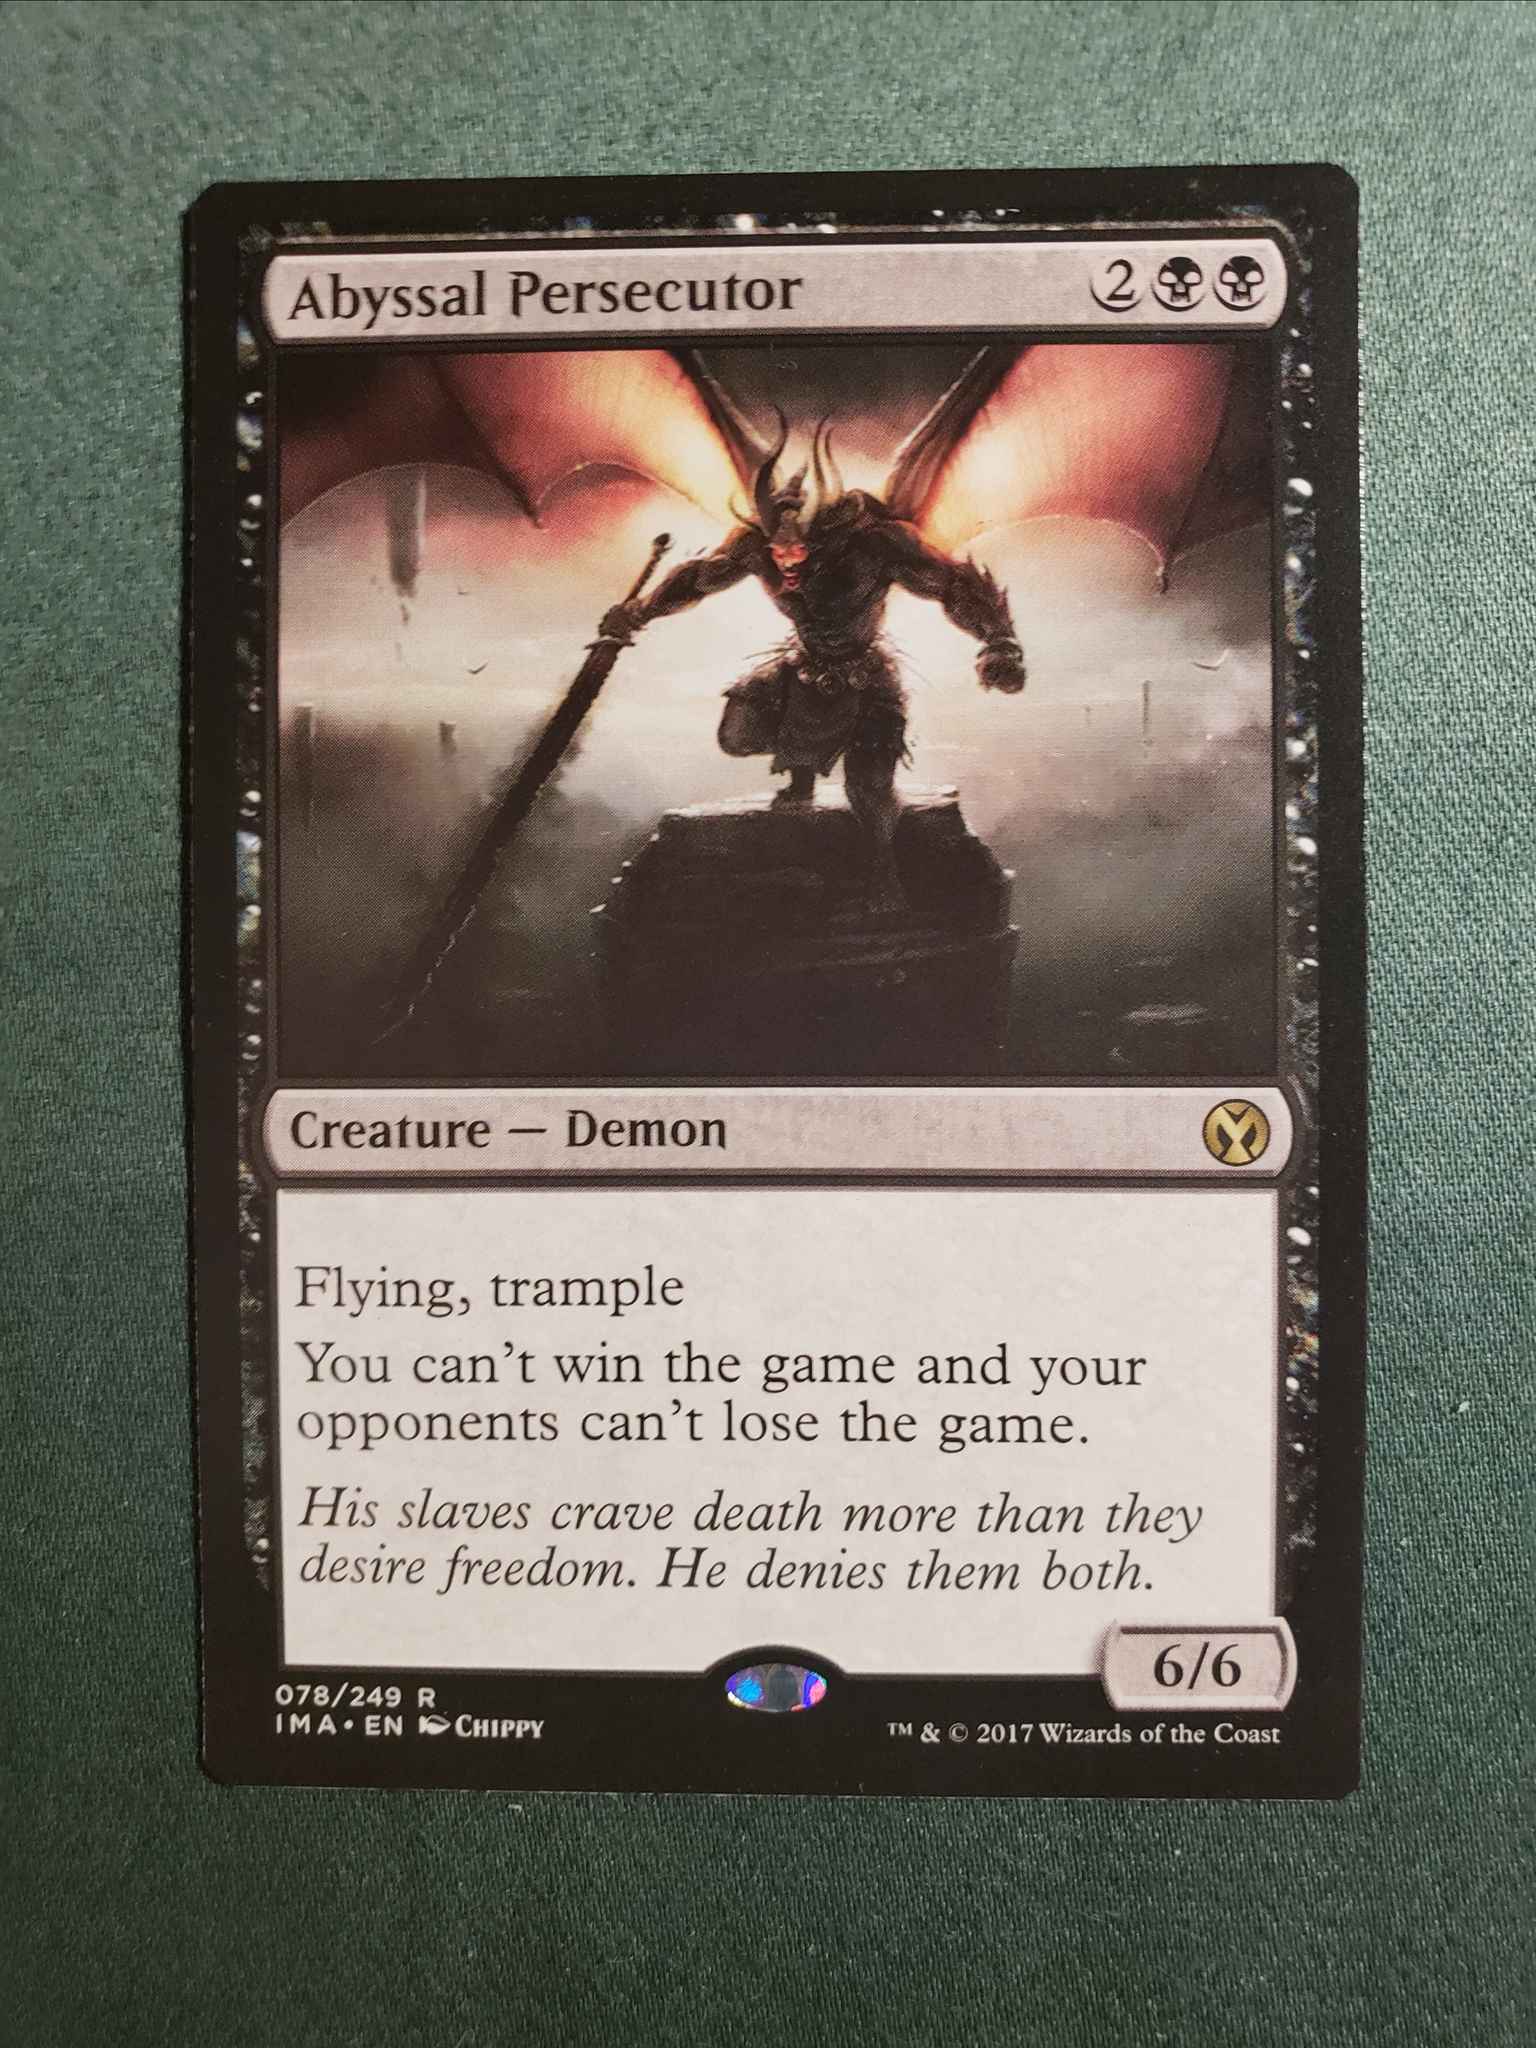 Ima Eng 078 R Abyssa Persecutor Lp All About Mtg Abyssal Persecutor Iconic Masters Magic The Gathering Online Gaming Store For Cards Miniatures Singles Packs Booster Boxes